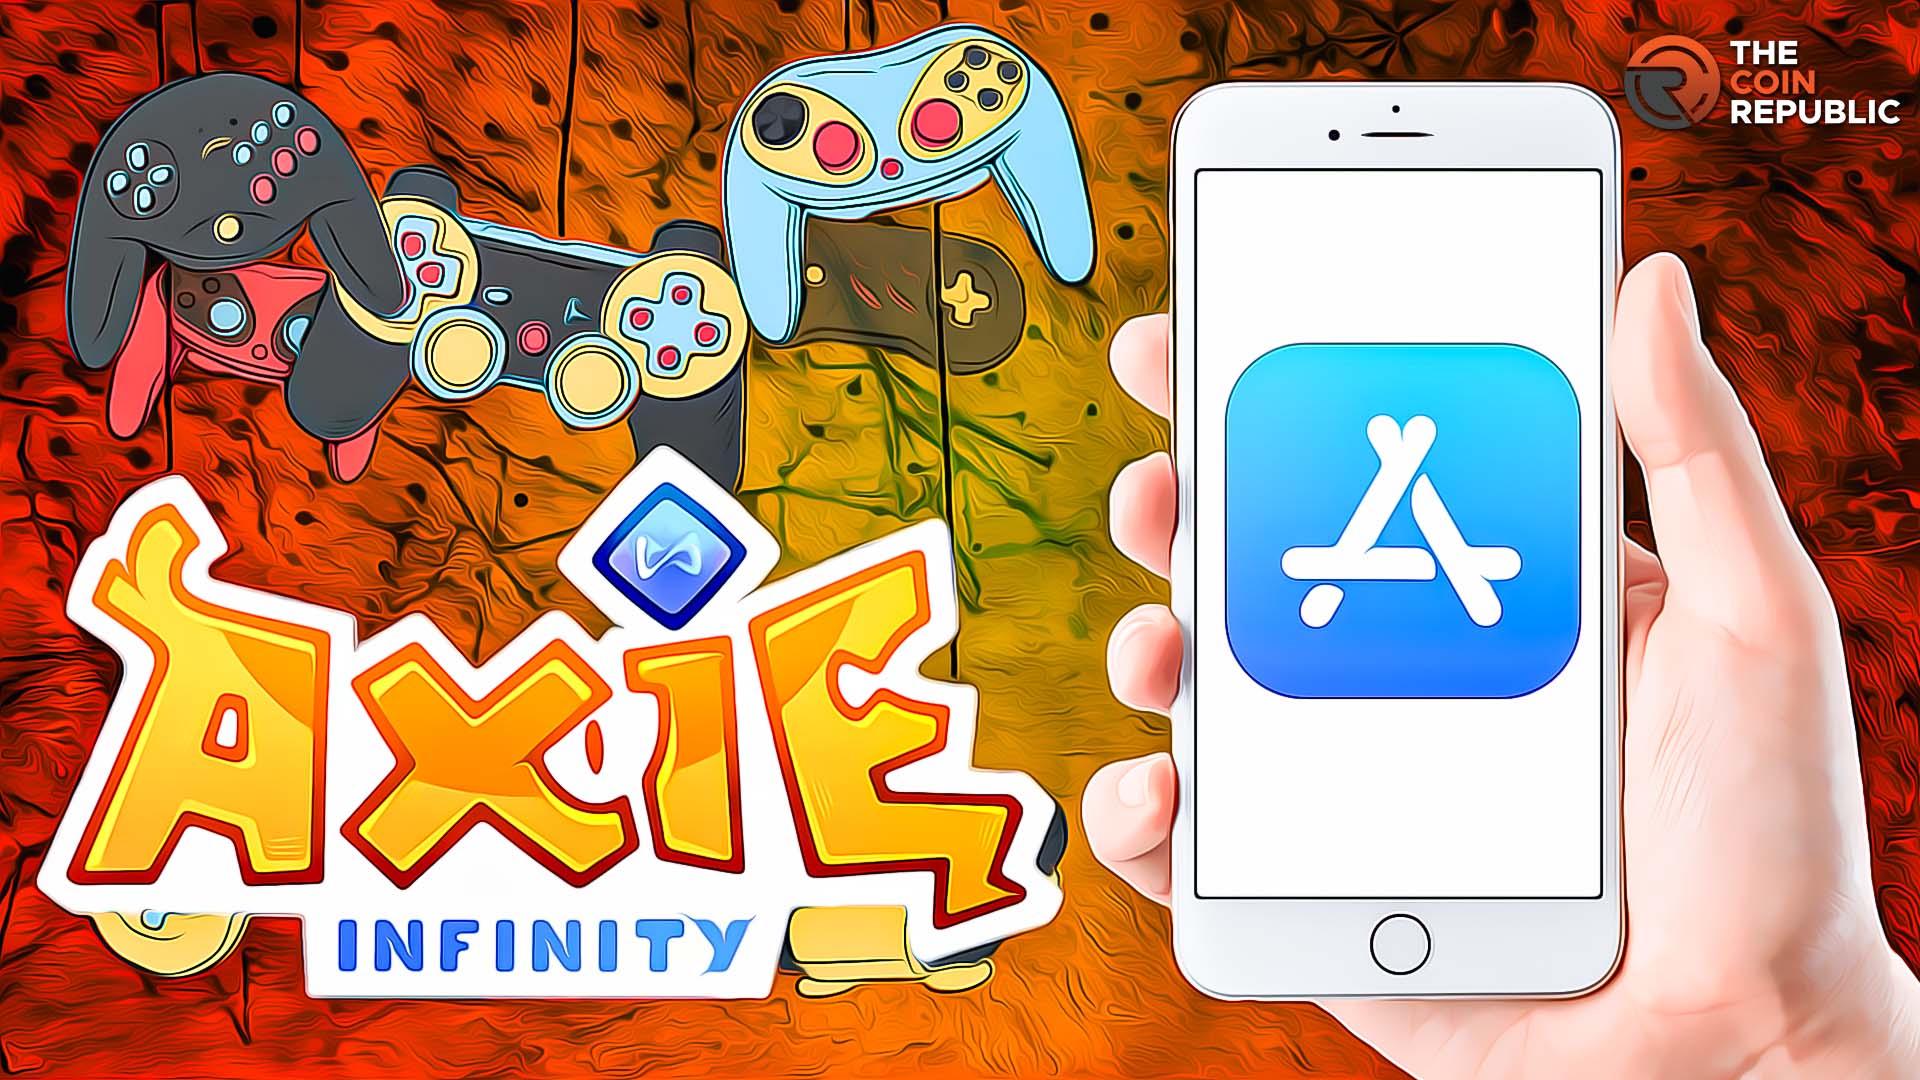 Axie Infinity’s Origins Now Available on iOS while AXS Price Slid